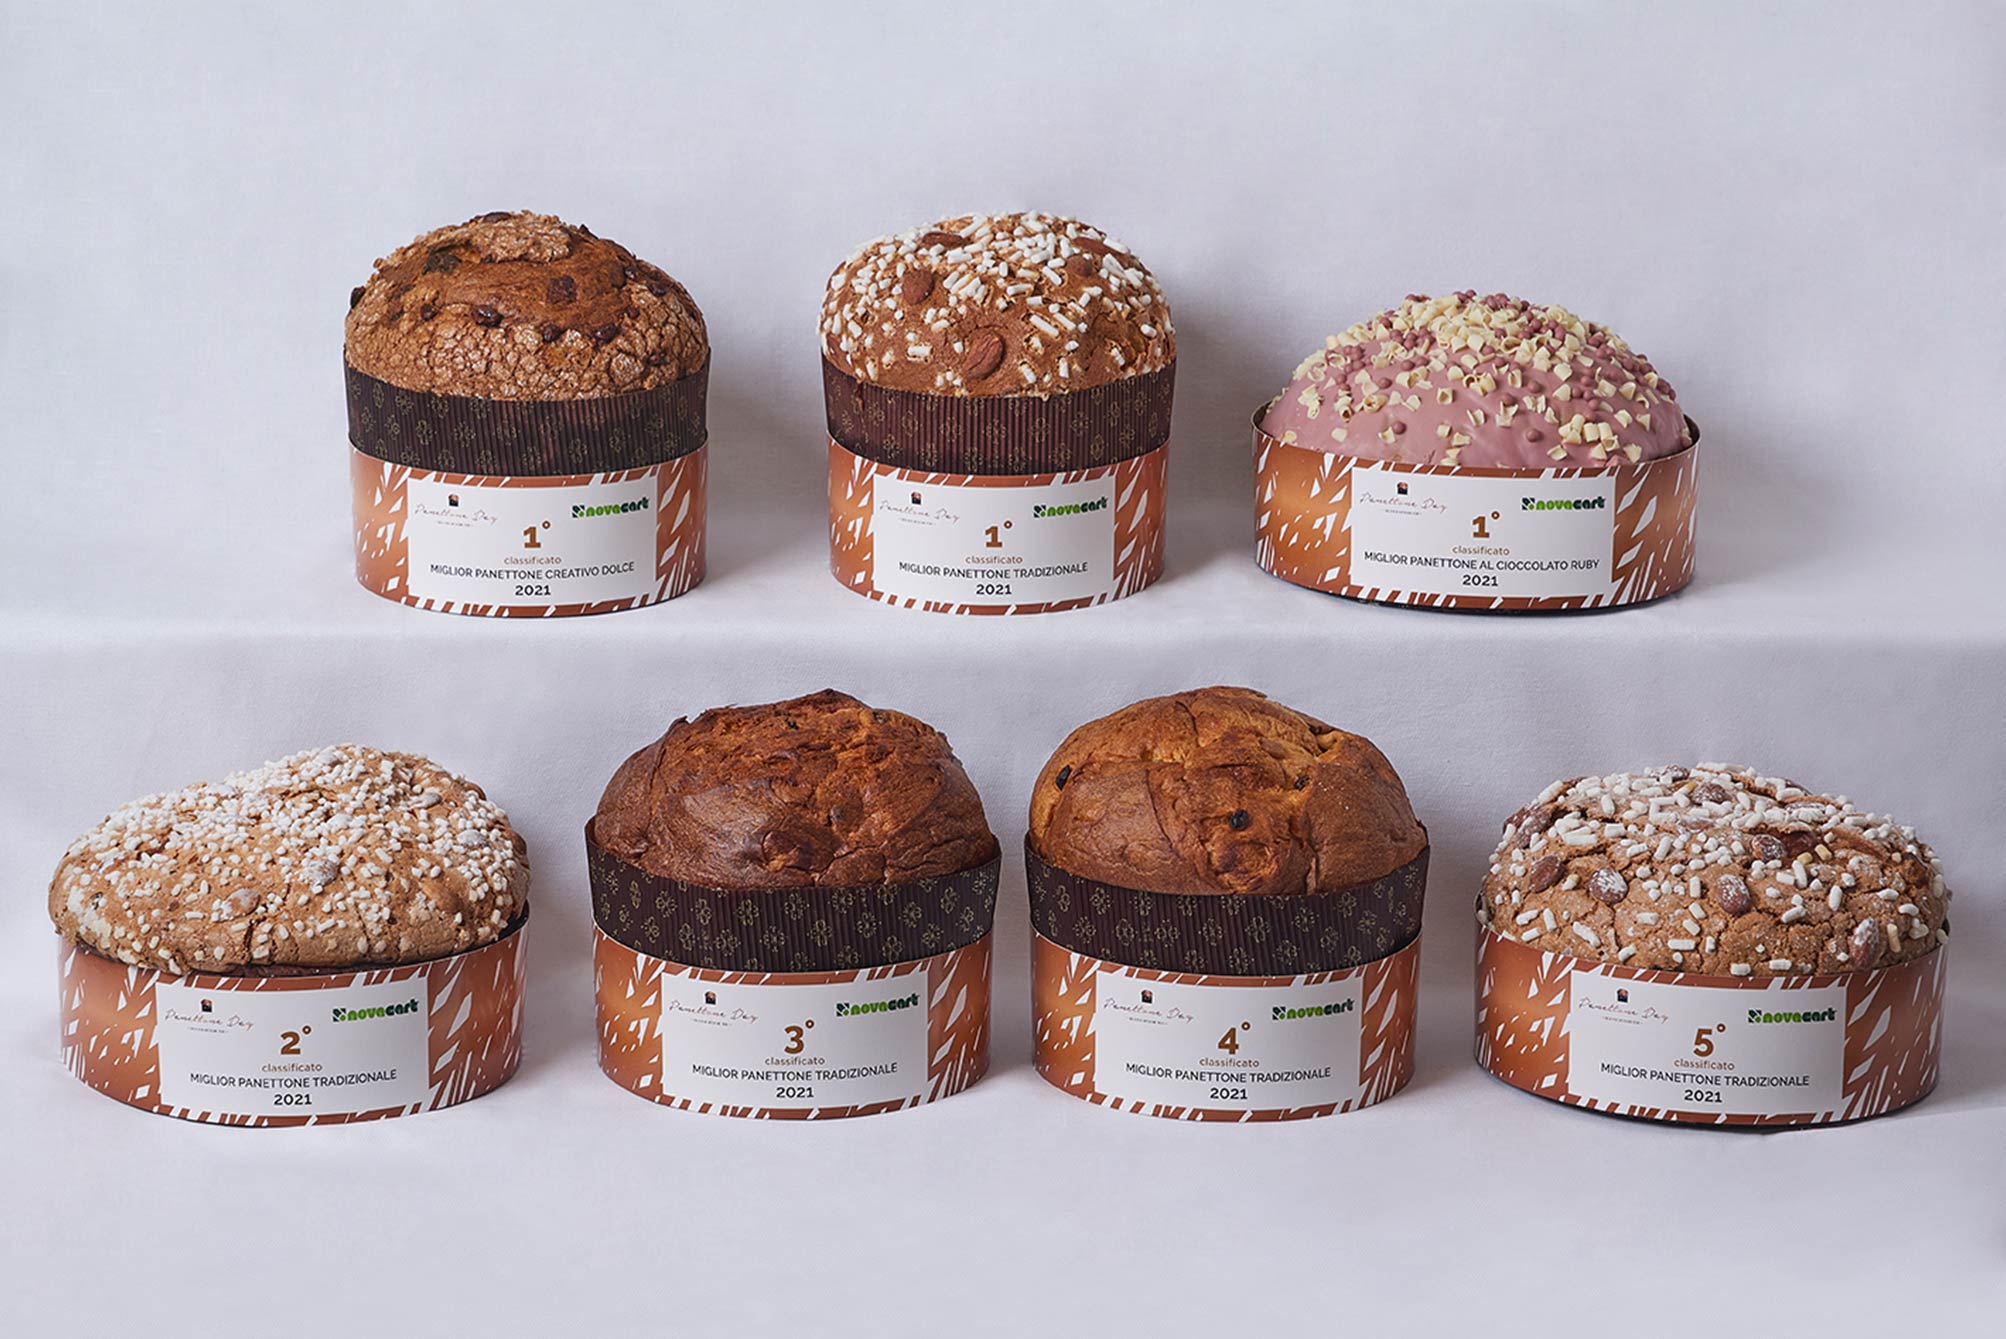 Panettone 2021: the winners' pastry creations